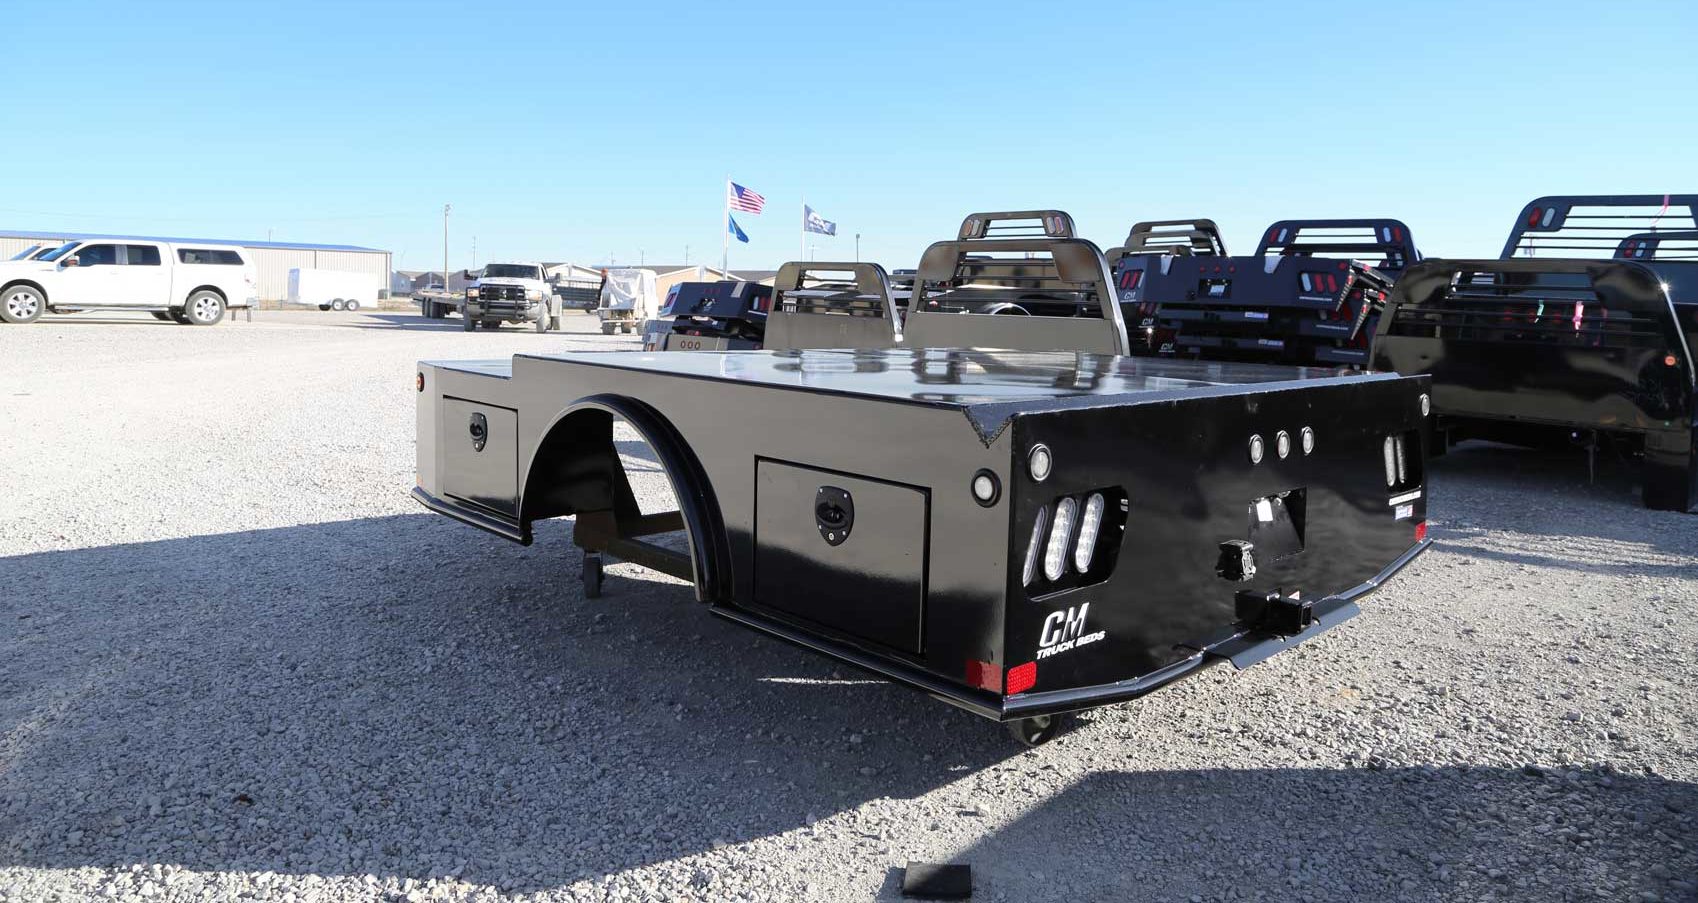 WD specialty flat bed on the lot, specially designed for welders needs